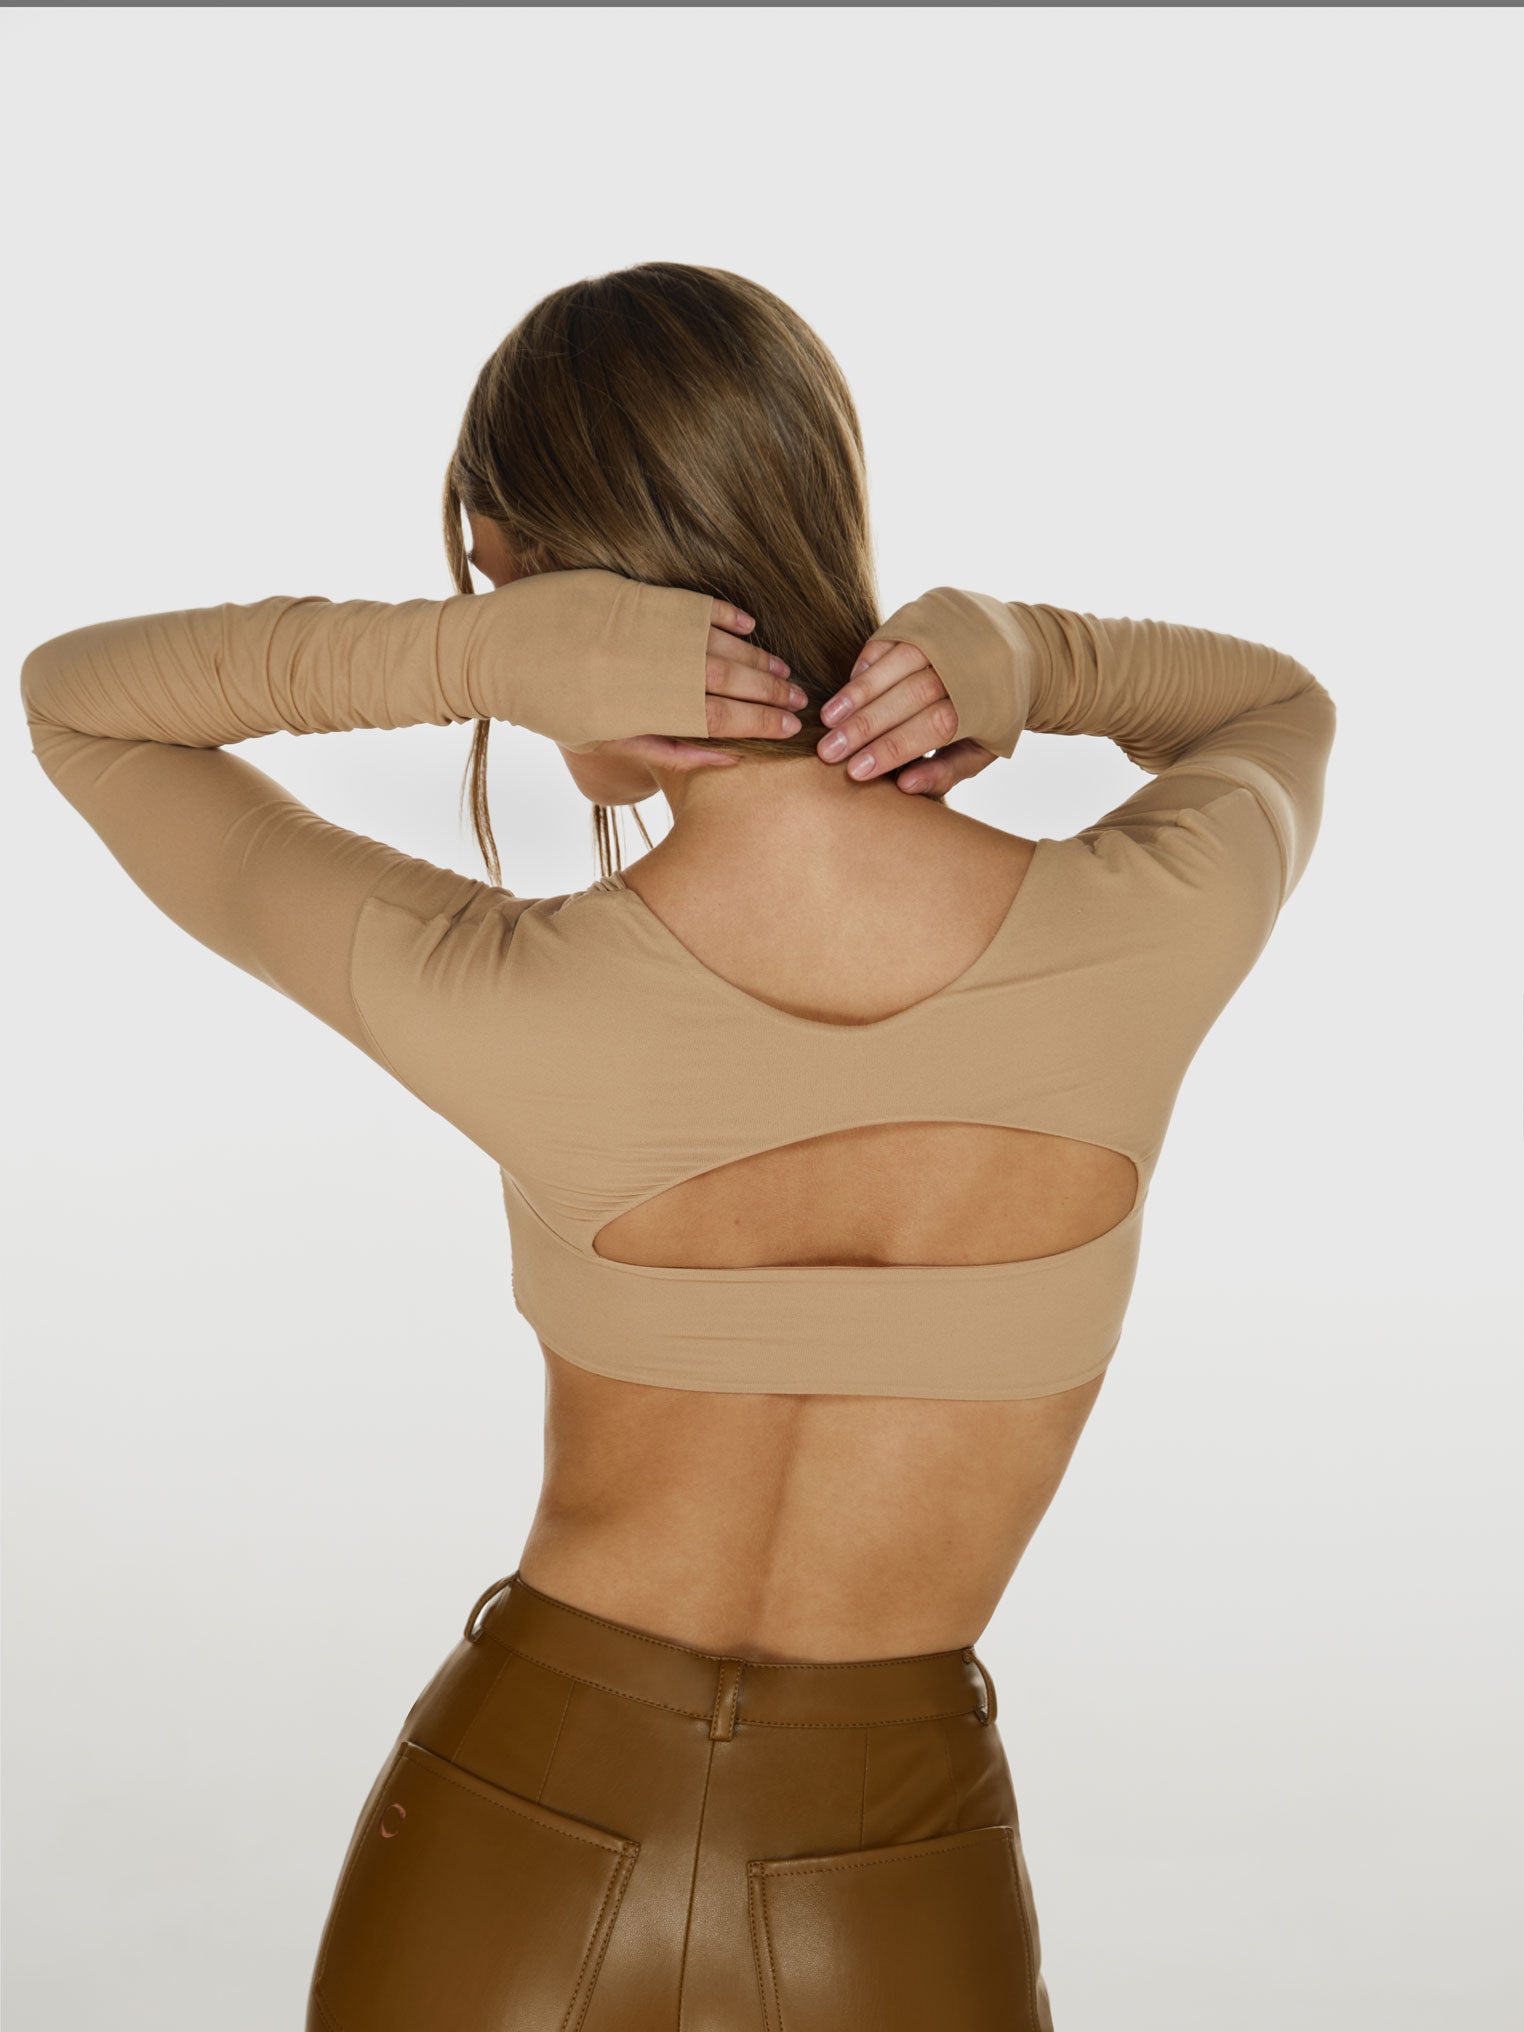 Medium shot of a girl in a beige long sleeved crop top, featuring horizontal cut at the back, and brown vegan leather pants with straight leg